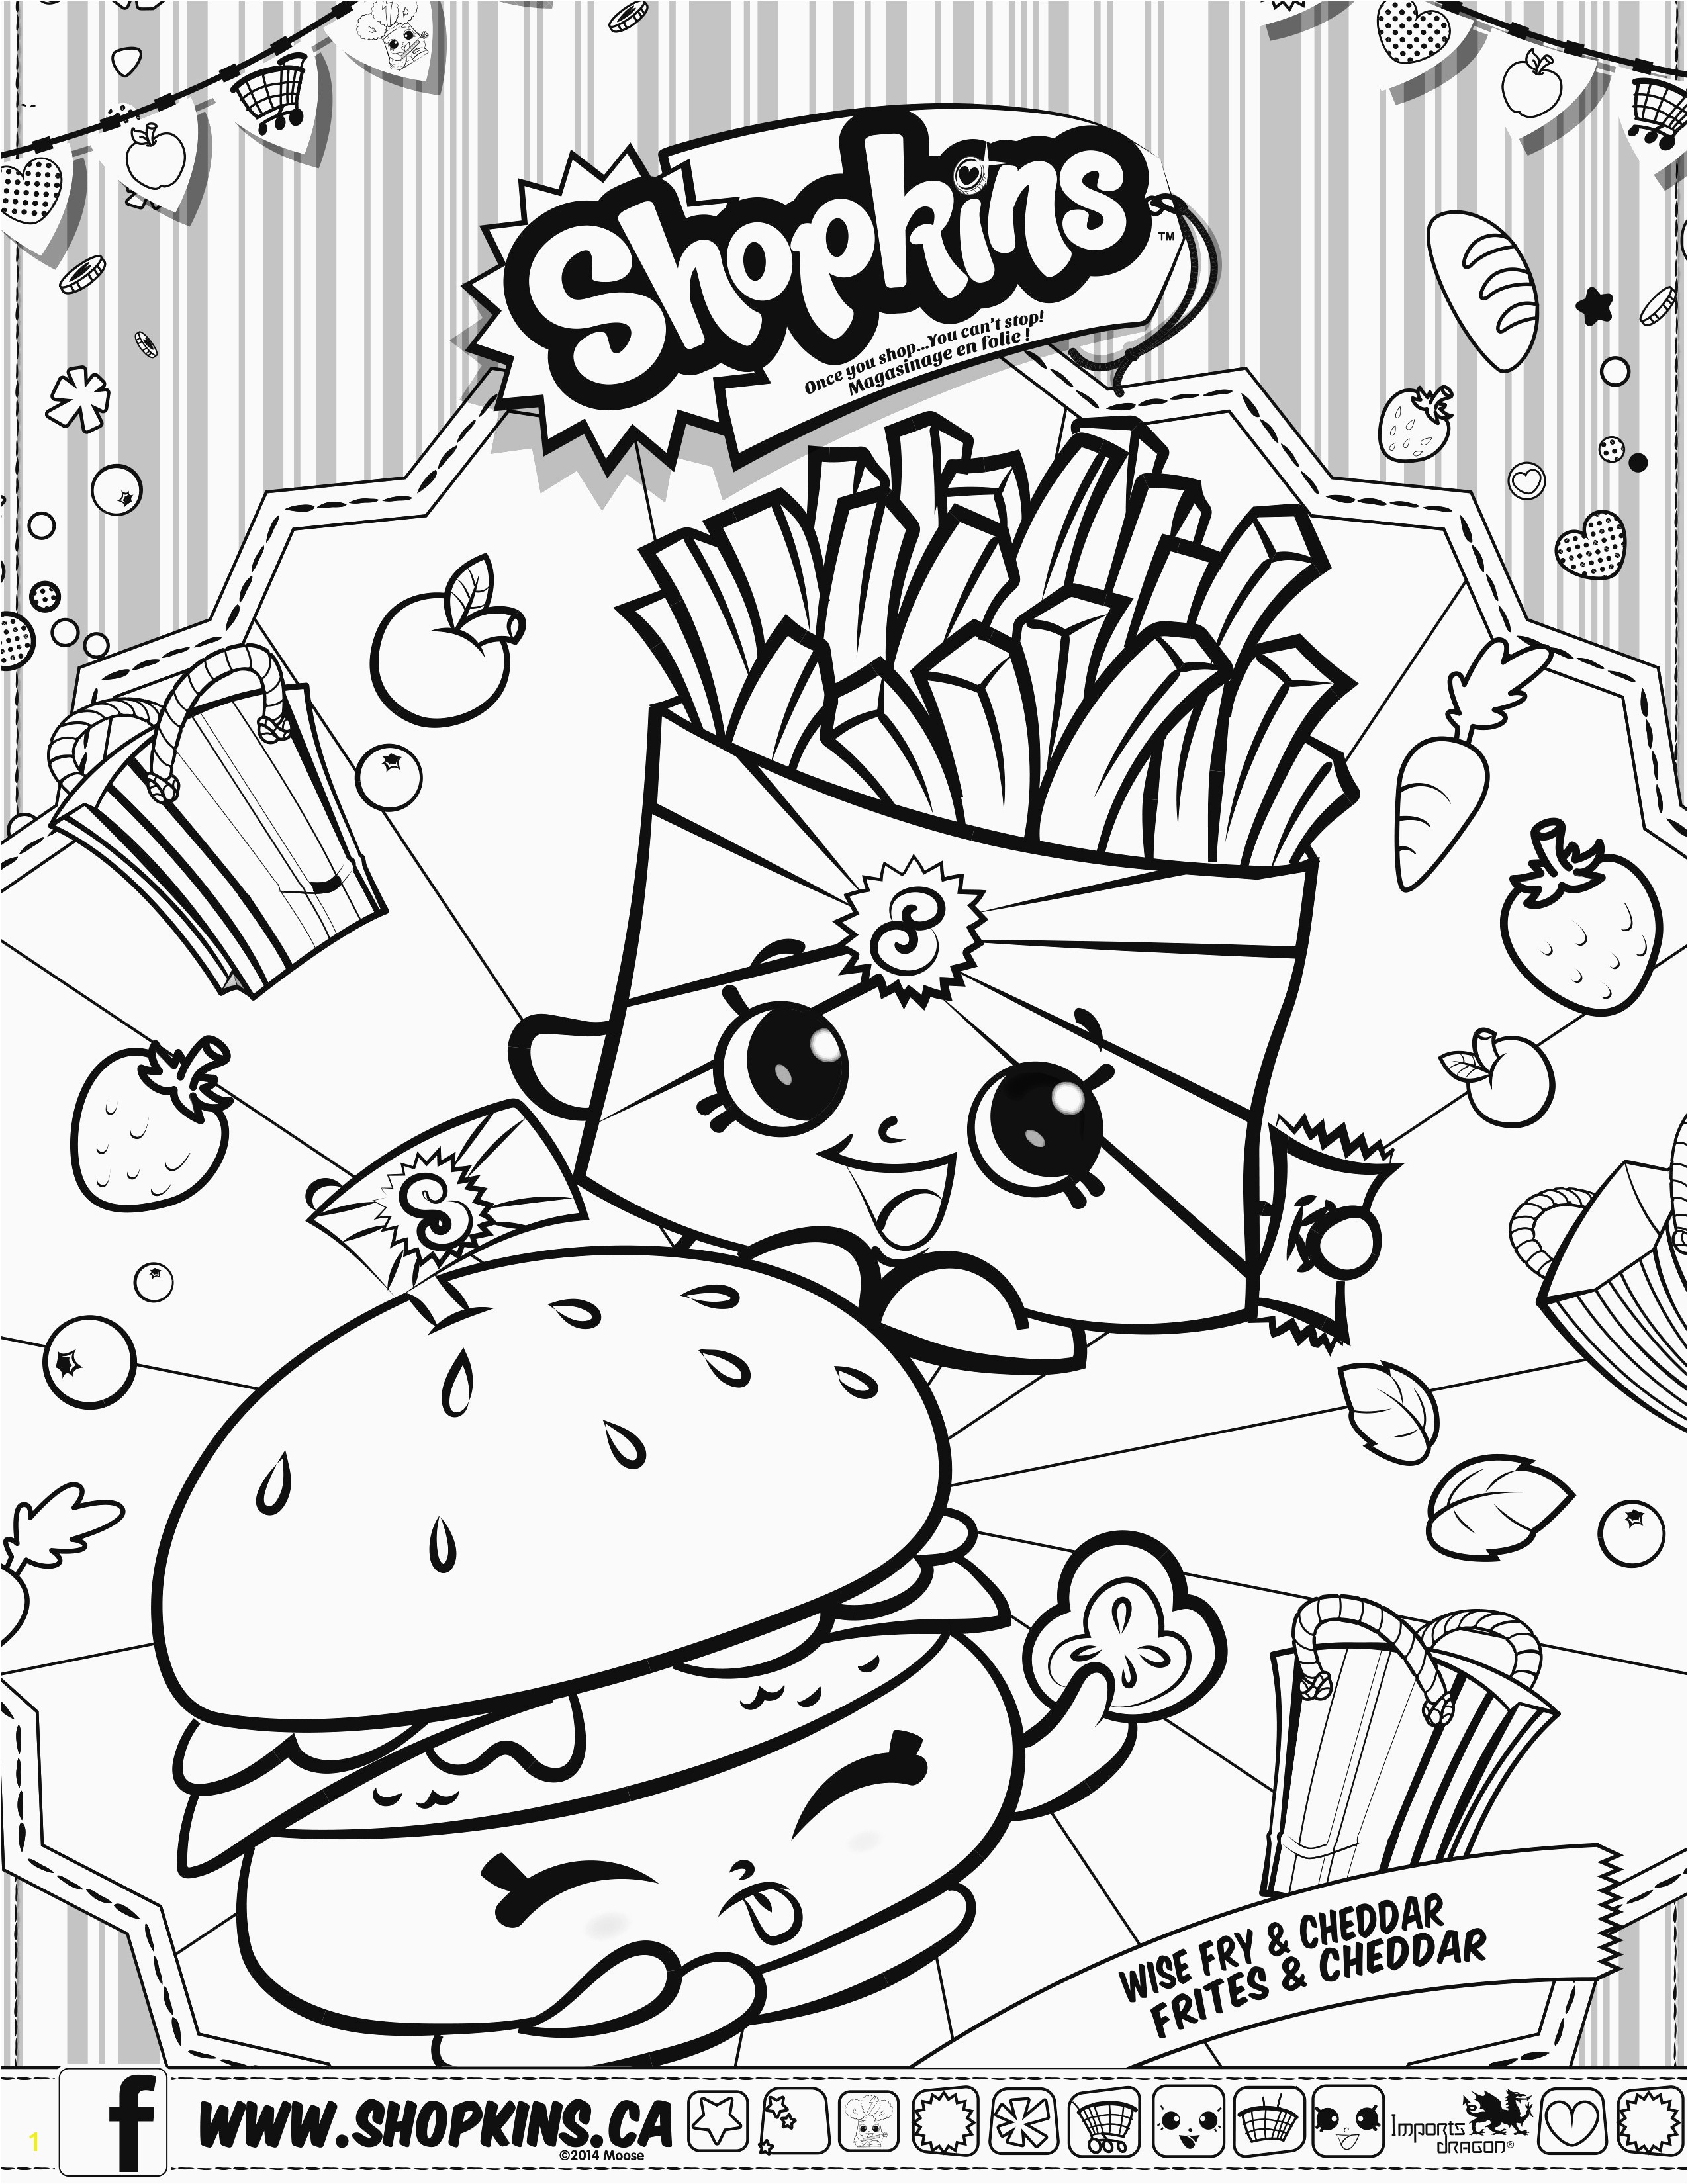 Passover Coloring Pages Unique 48 Awesome Collection Passover Coloring Pages